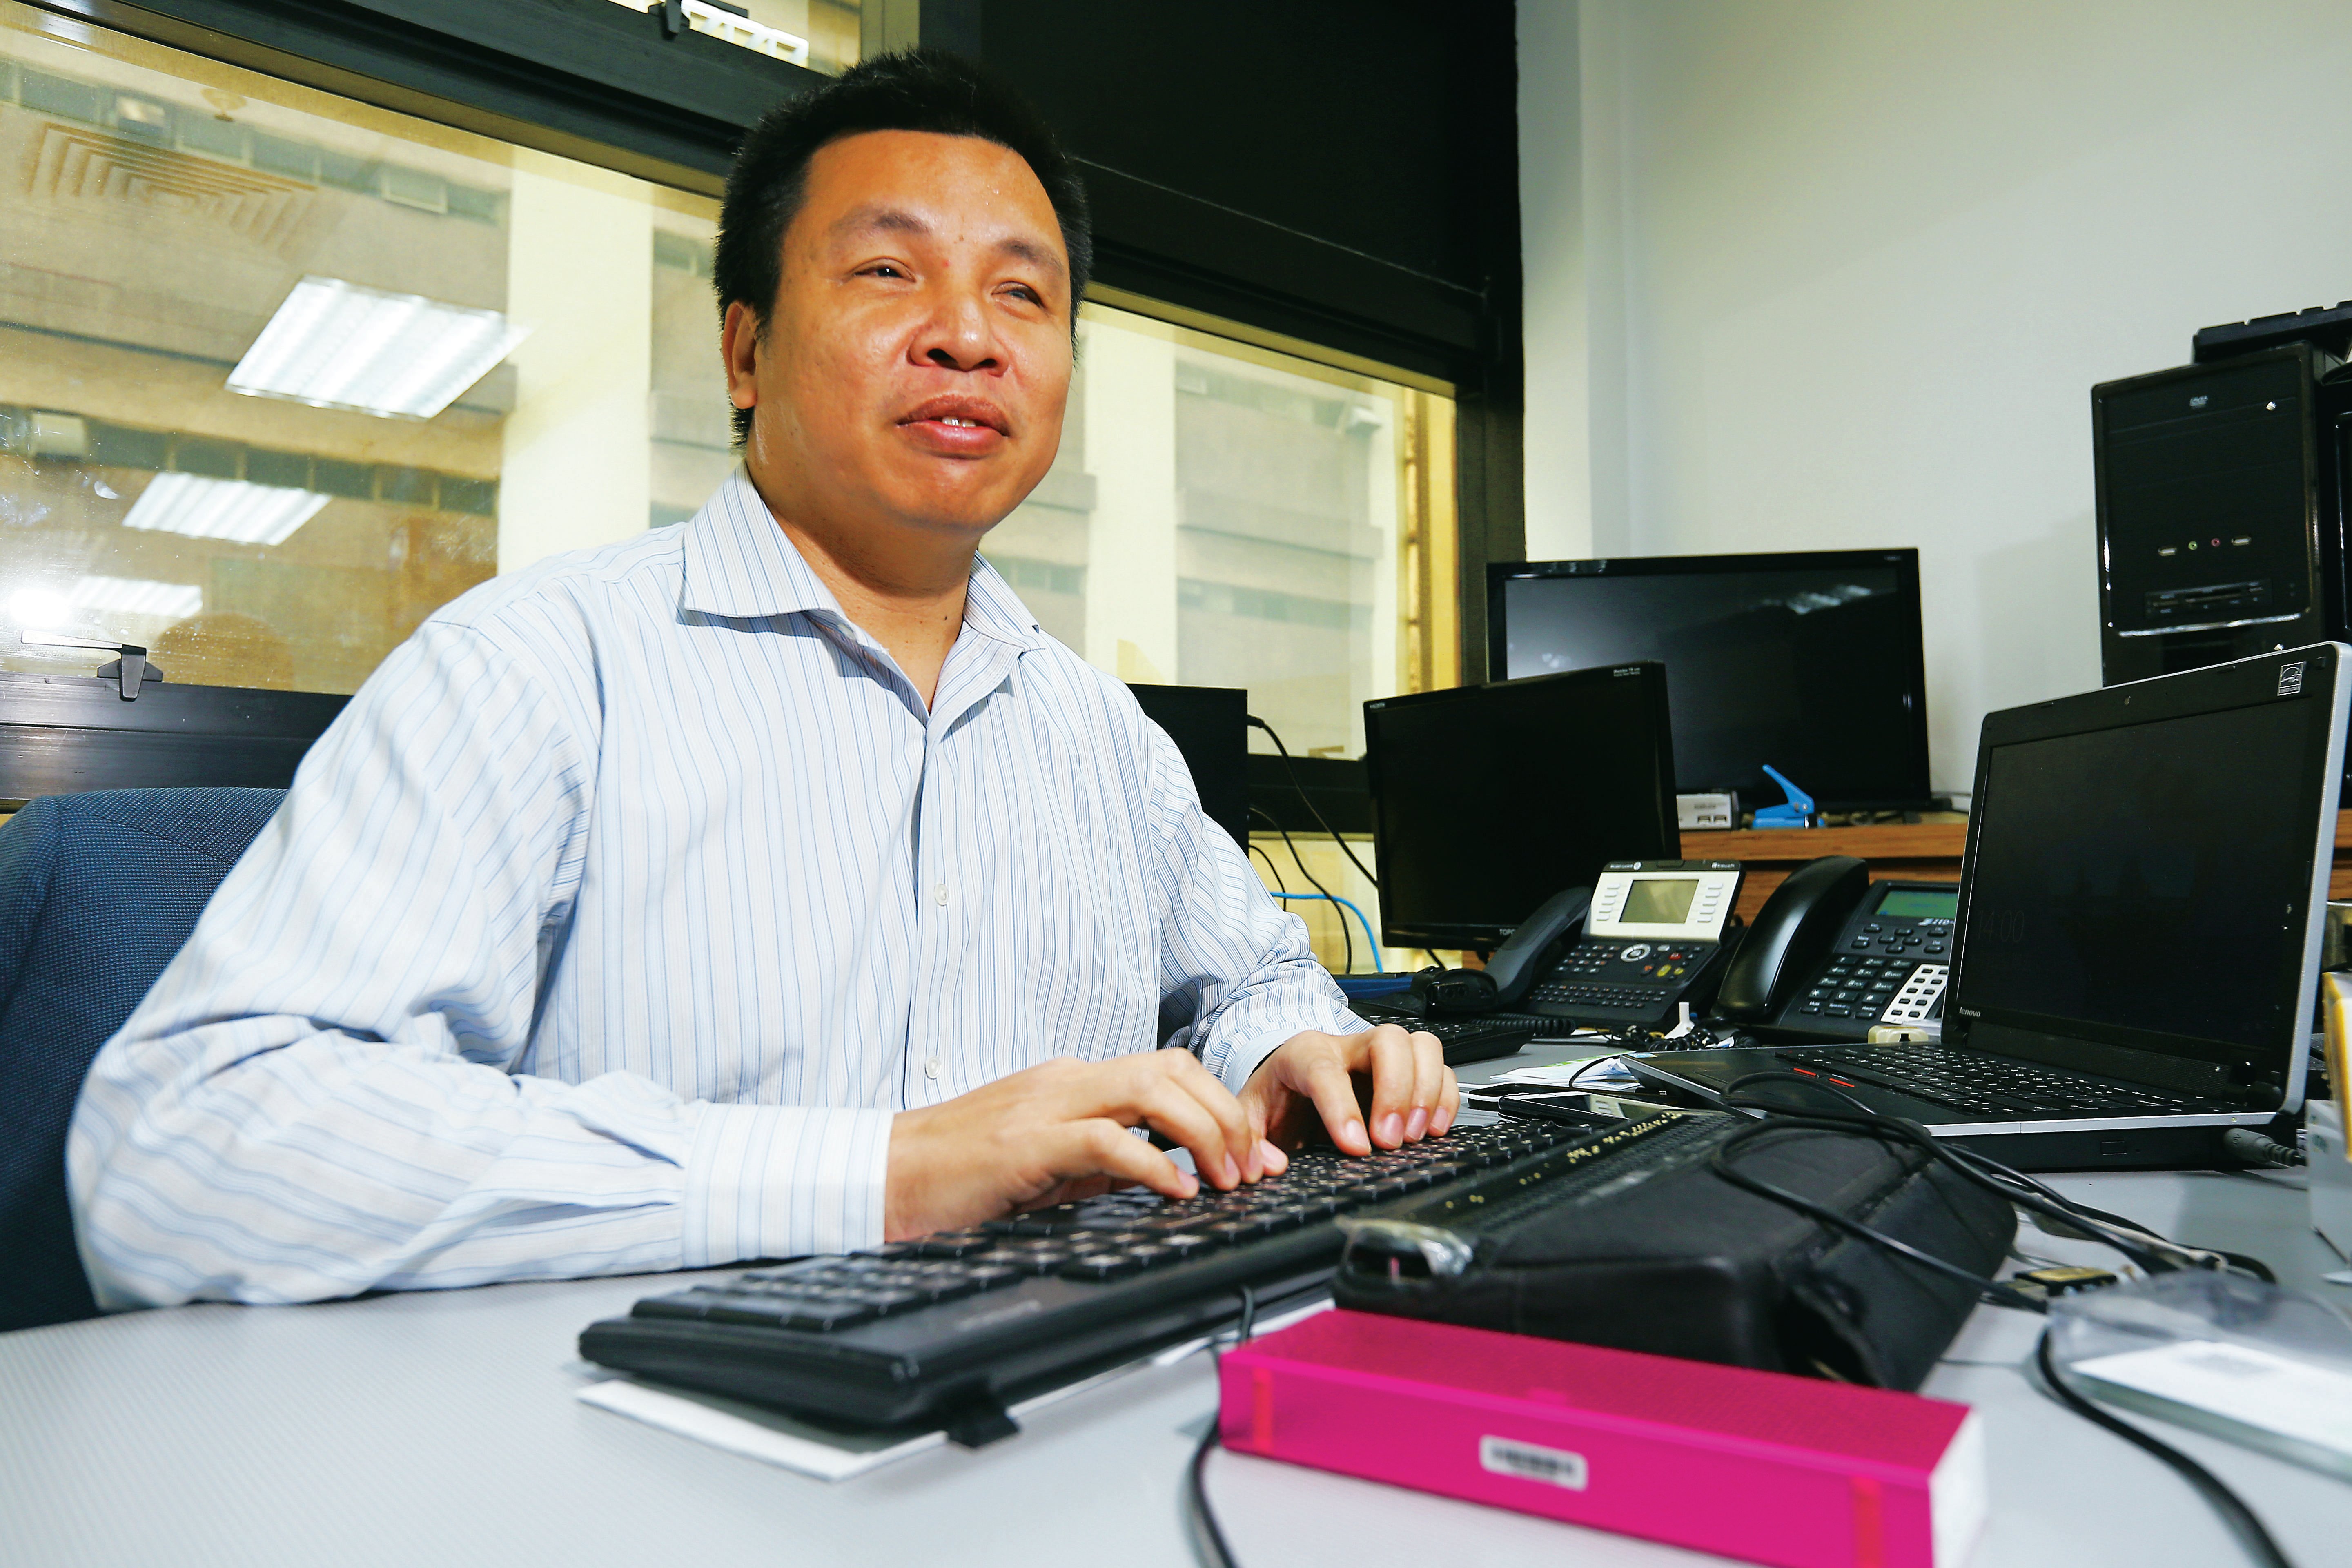 Edward Yip feels an urge to connect blind people to the colourful world out there through technology. Photo: Edmond So